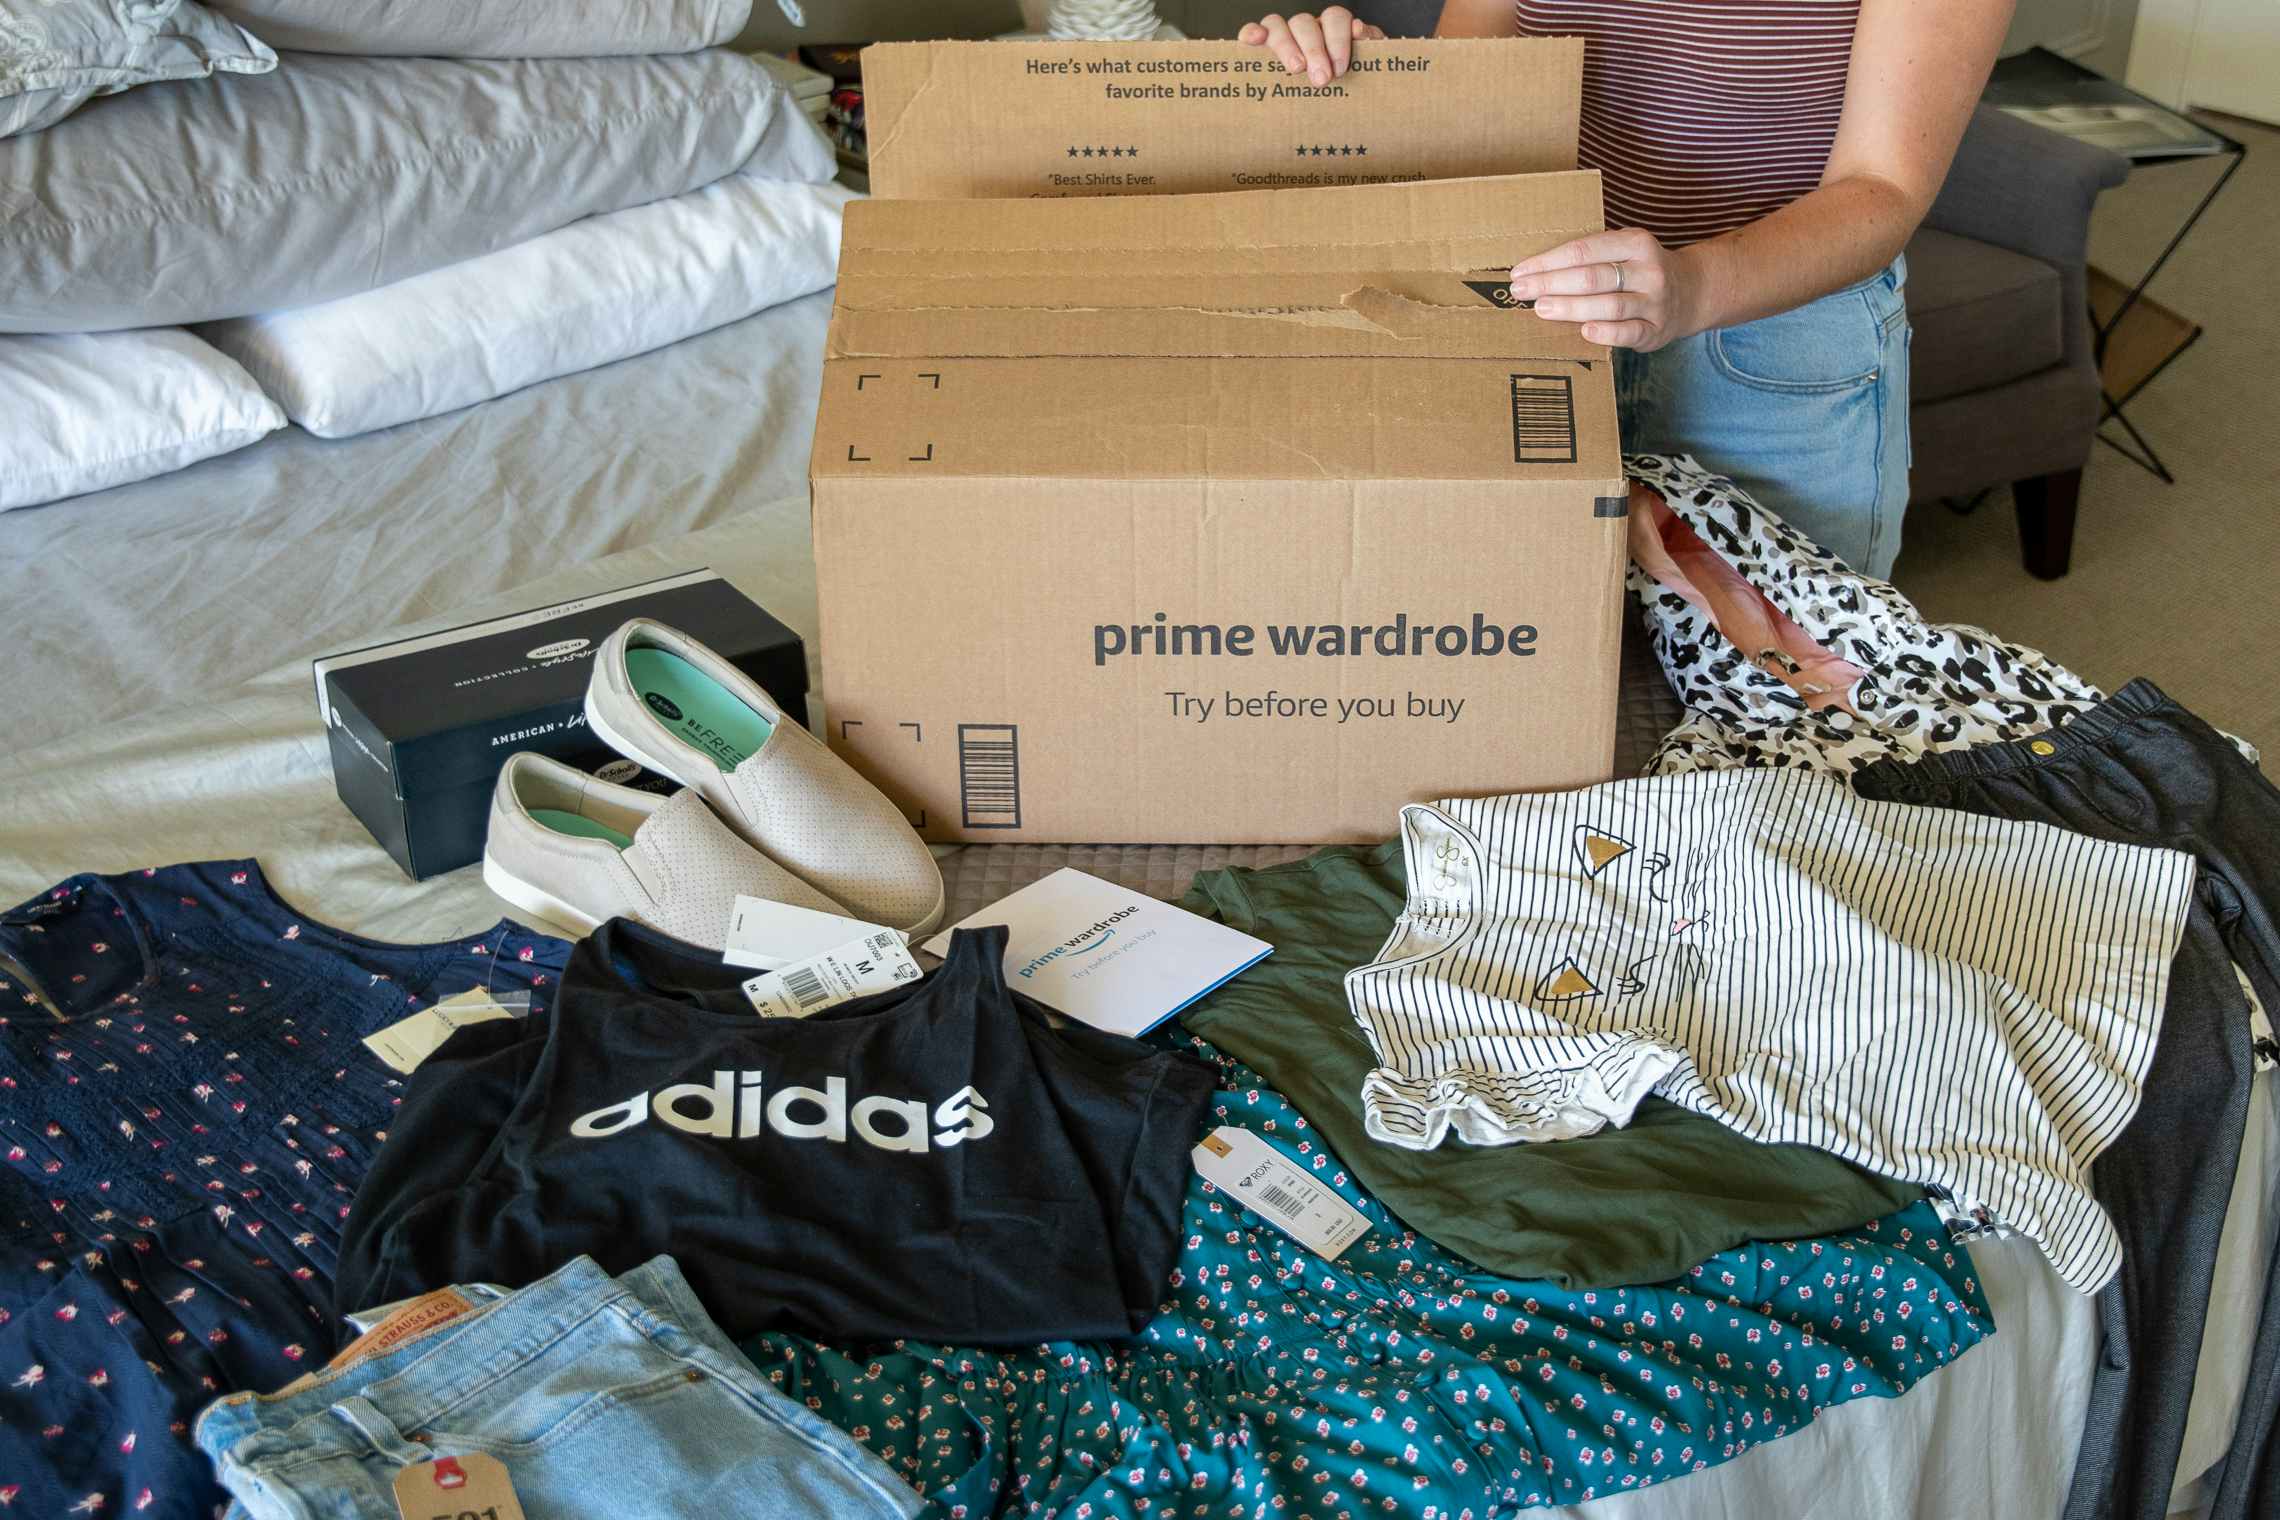 A woman unpacking an amazon prime wardrobe order from a box.